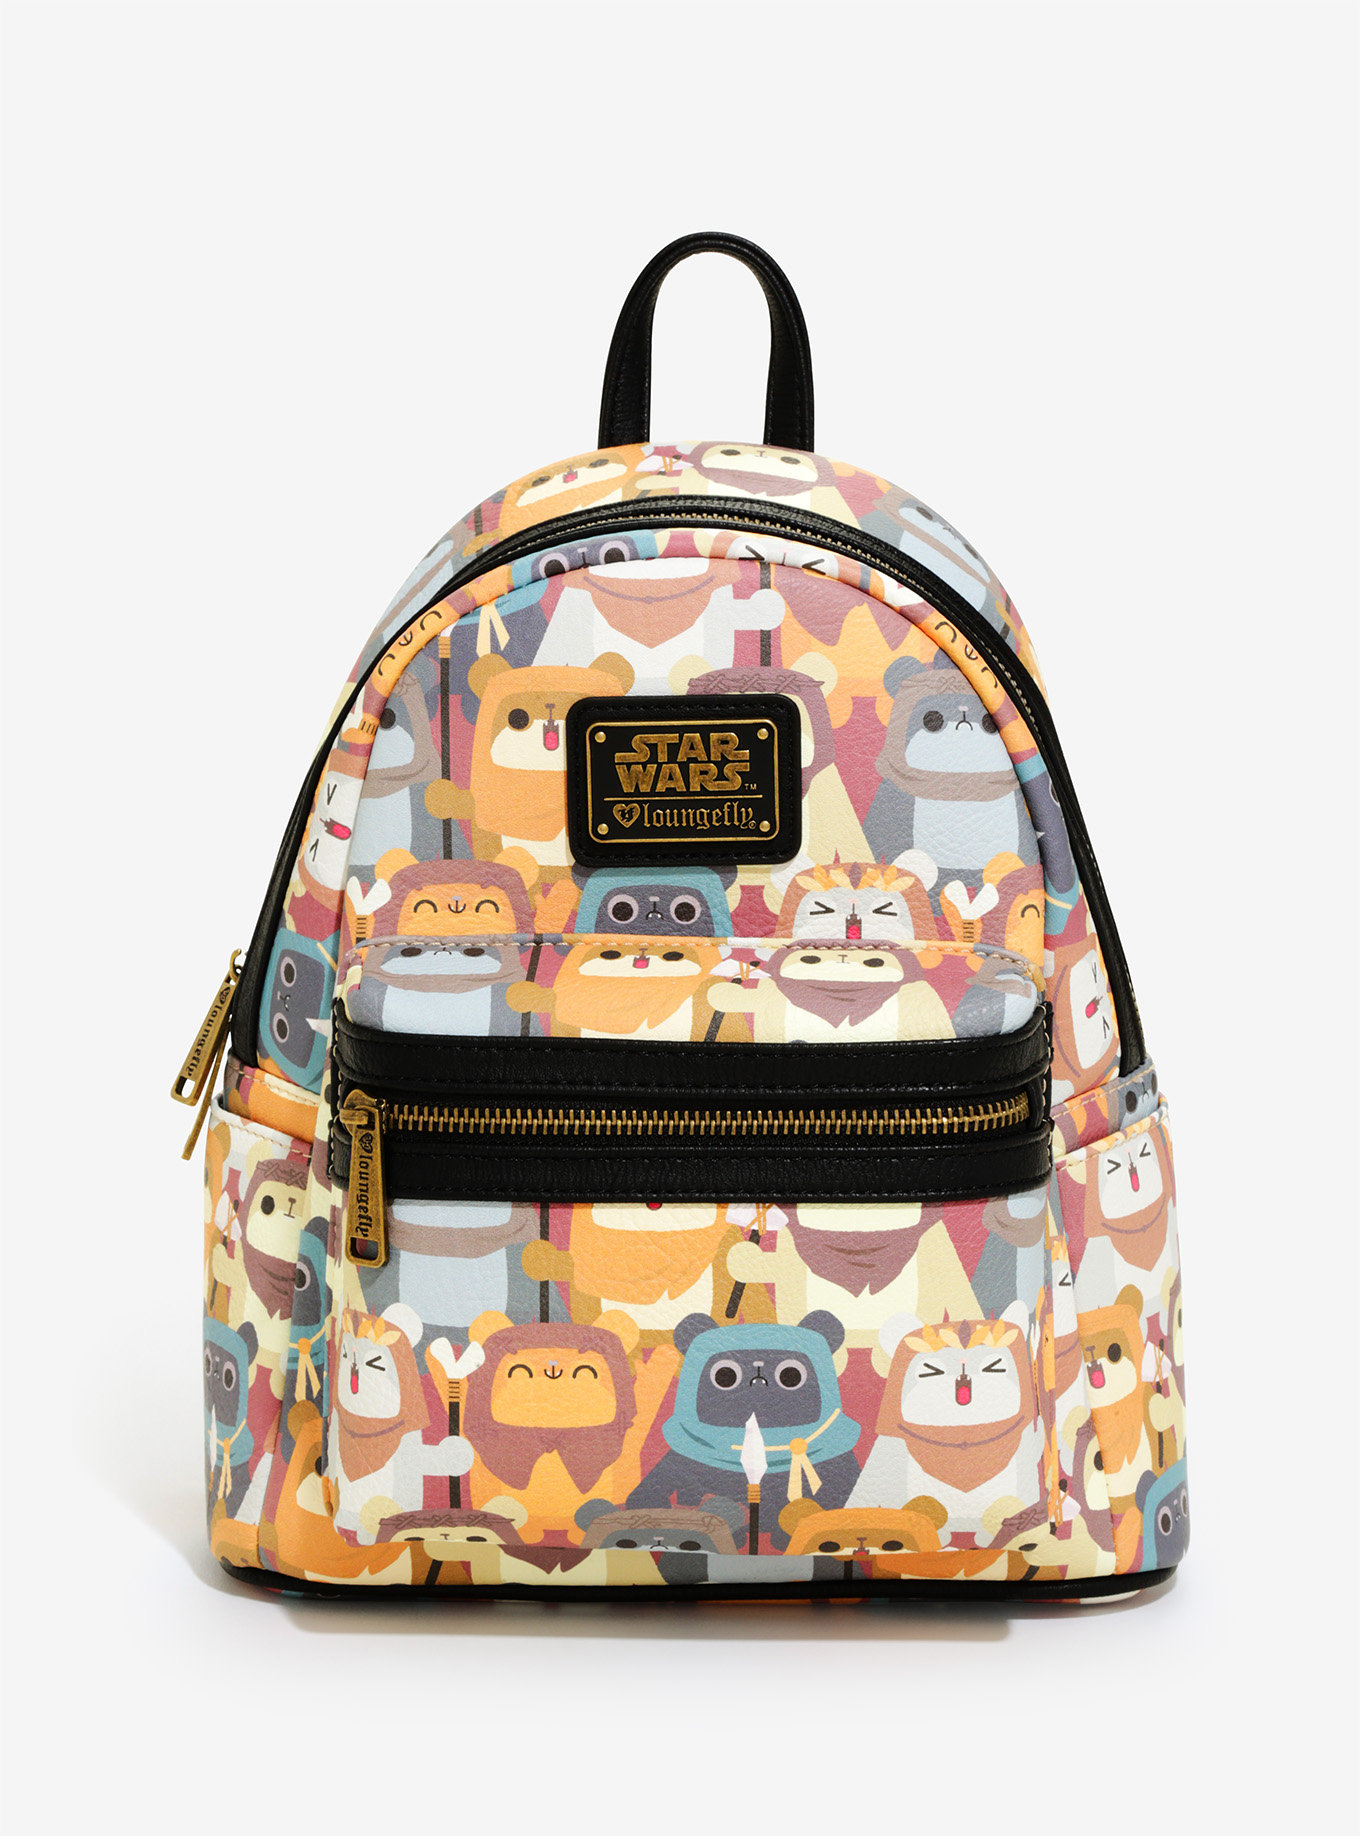 Loungefly Ewok Mini Backpack at Box Lunch - The Kessel Runway